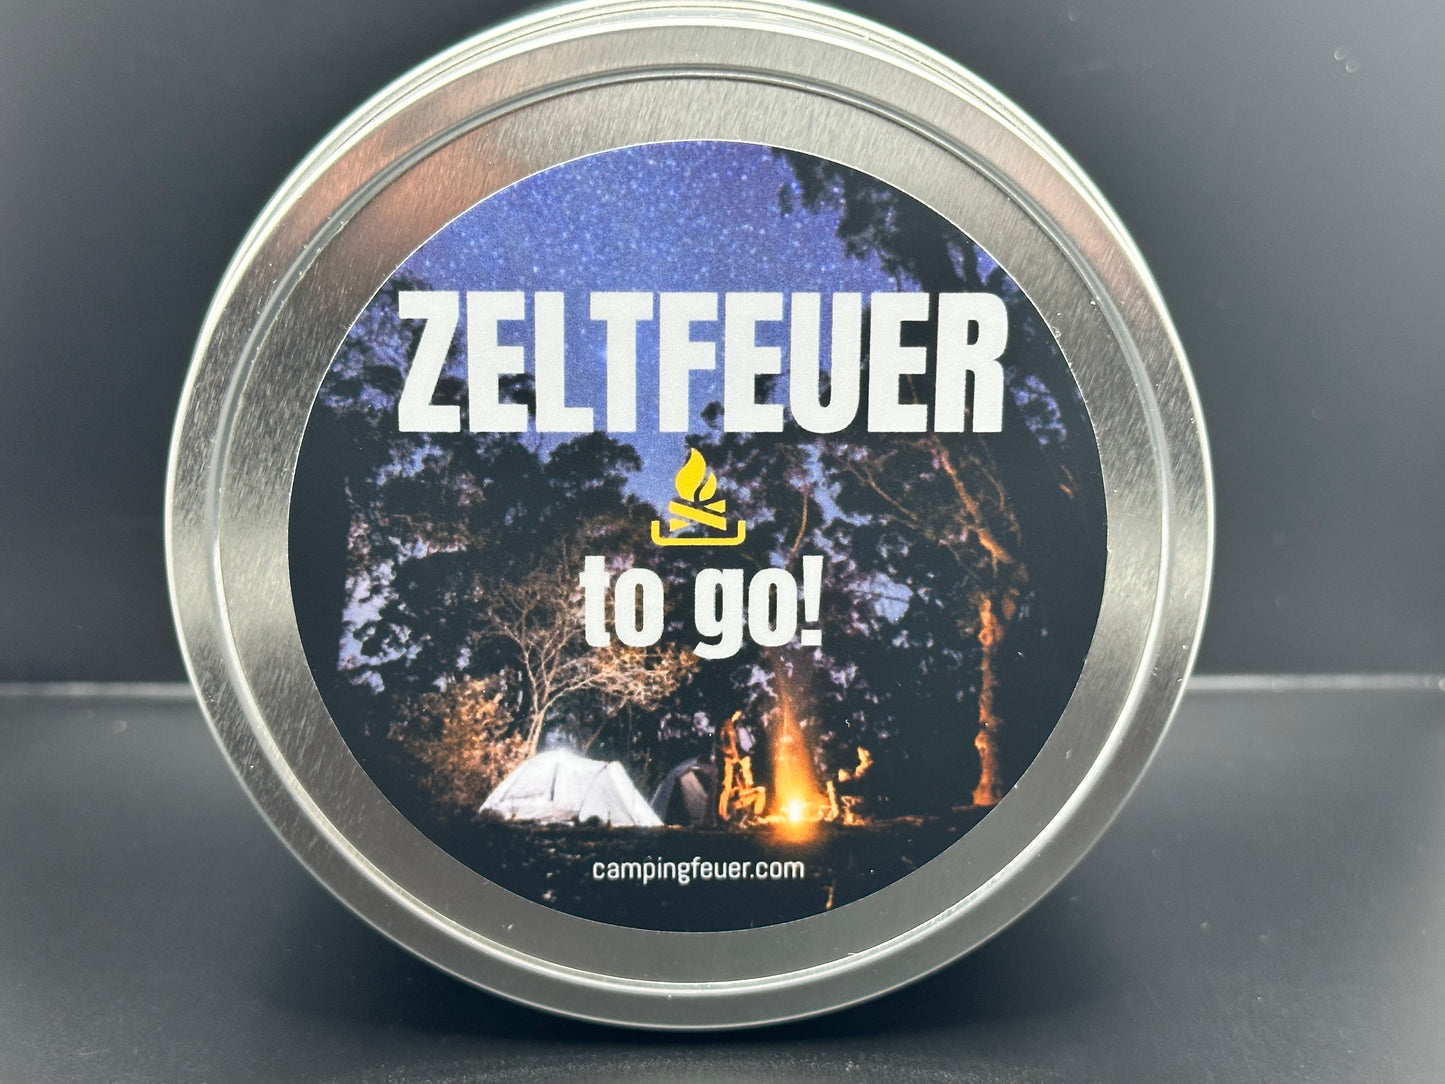 Zeltfeuer to go! als Lagerfeuer mit Holznote